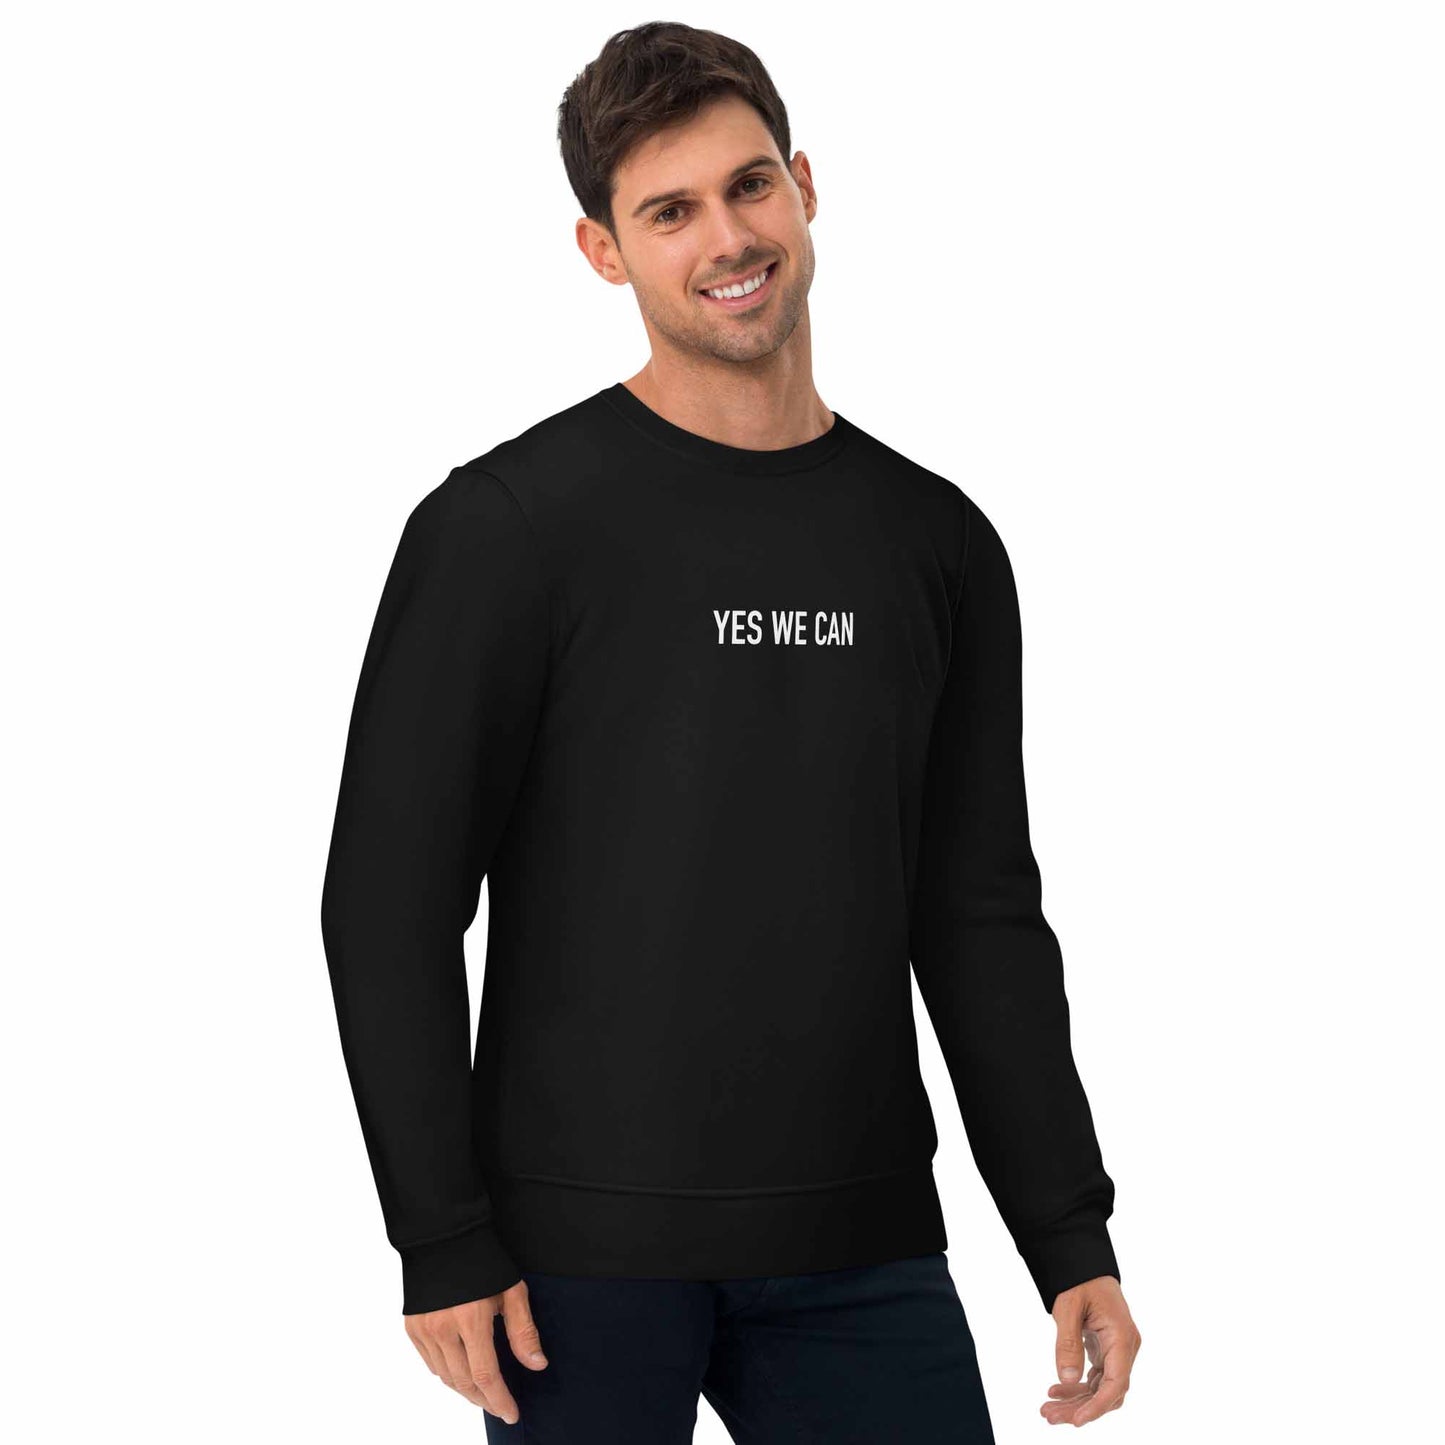 Men black inspirational sweatshirt with Barack Obama's inspirational quote, "Yes We Can."